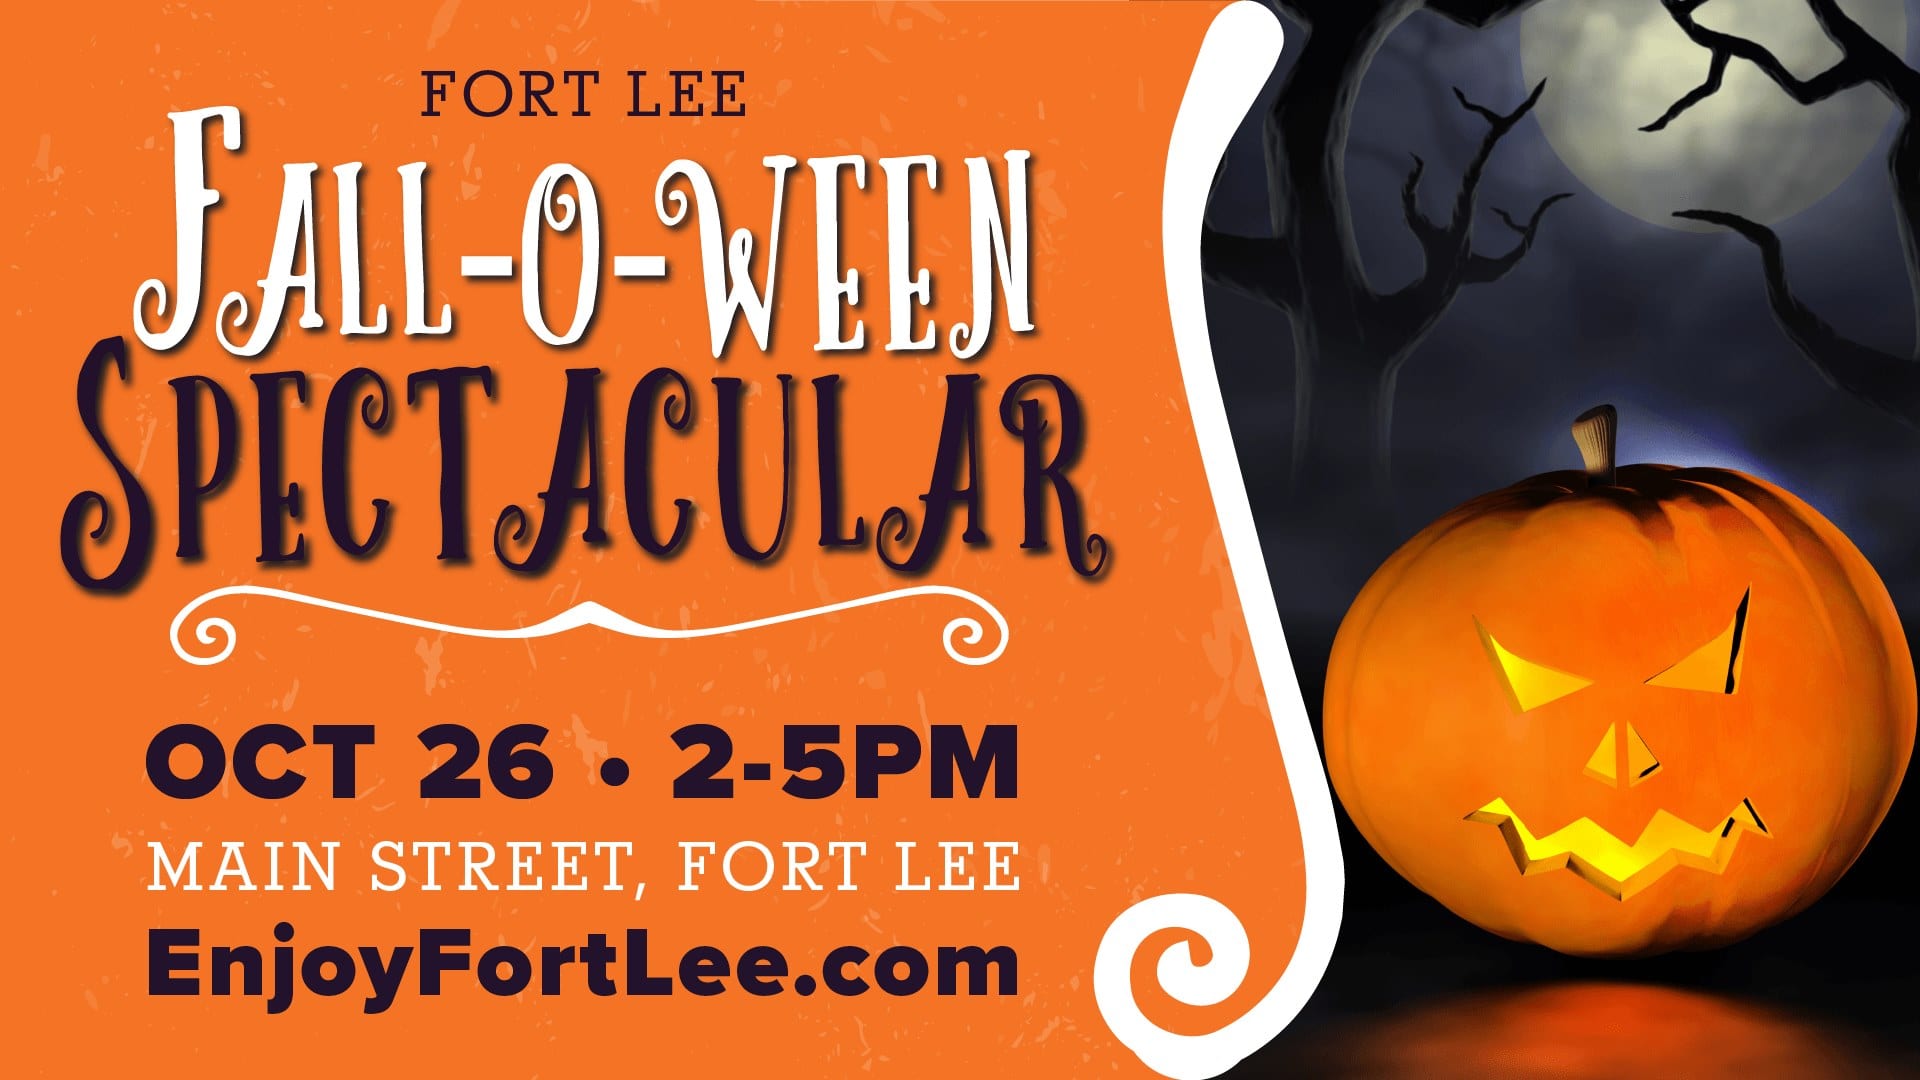 Fort Lee's Fall-O-Ween Spectacular